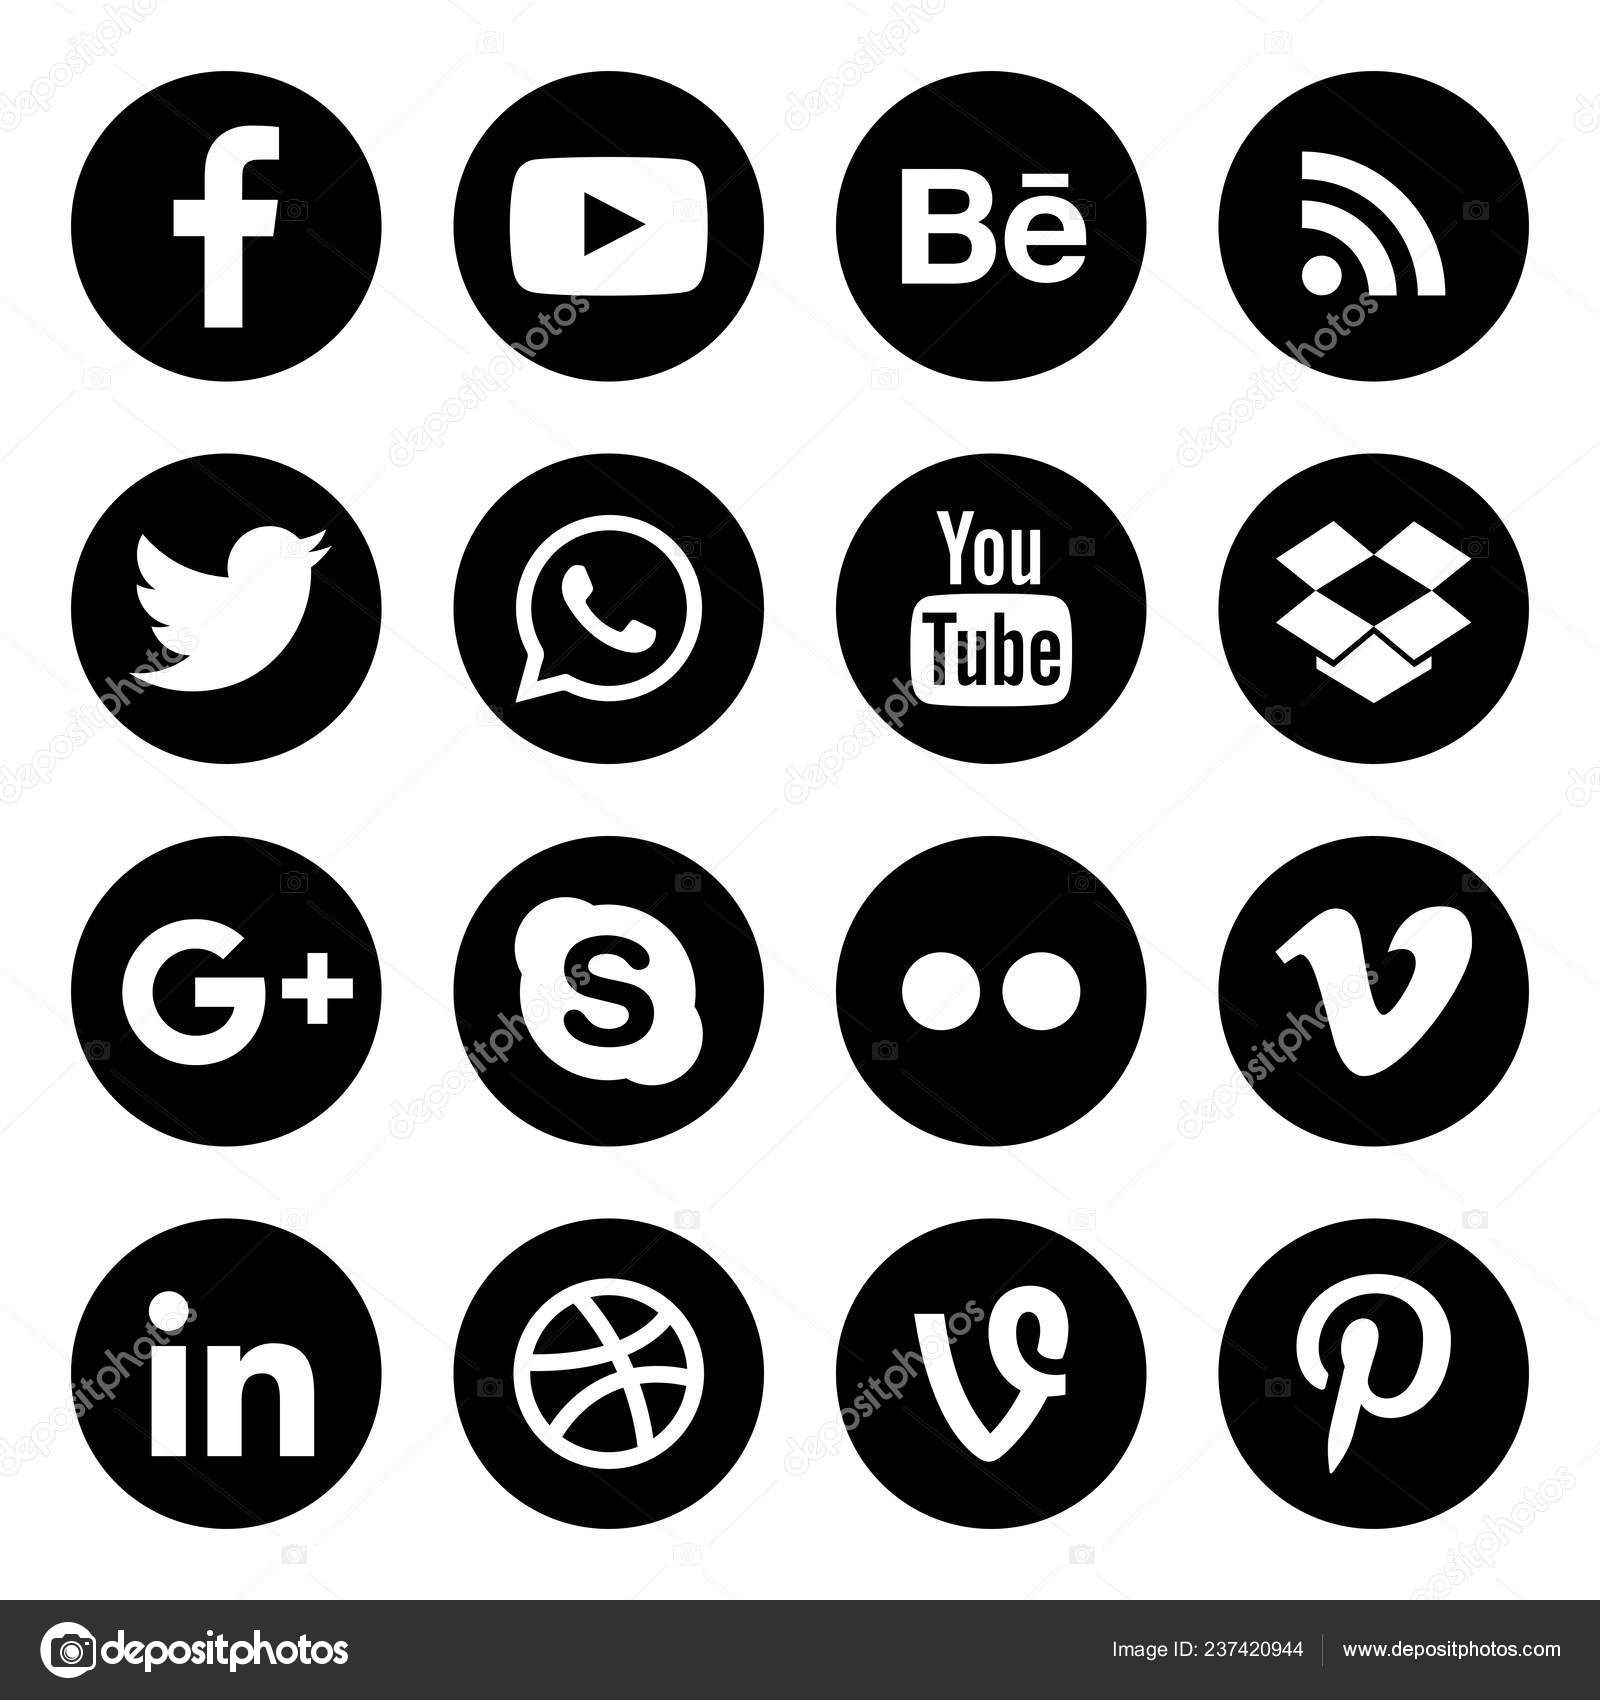 New Media Icon Images Stock Photos Vectors Shutterstock